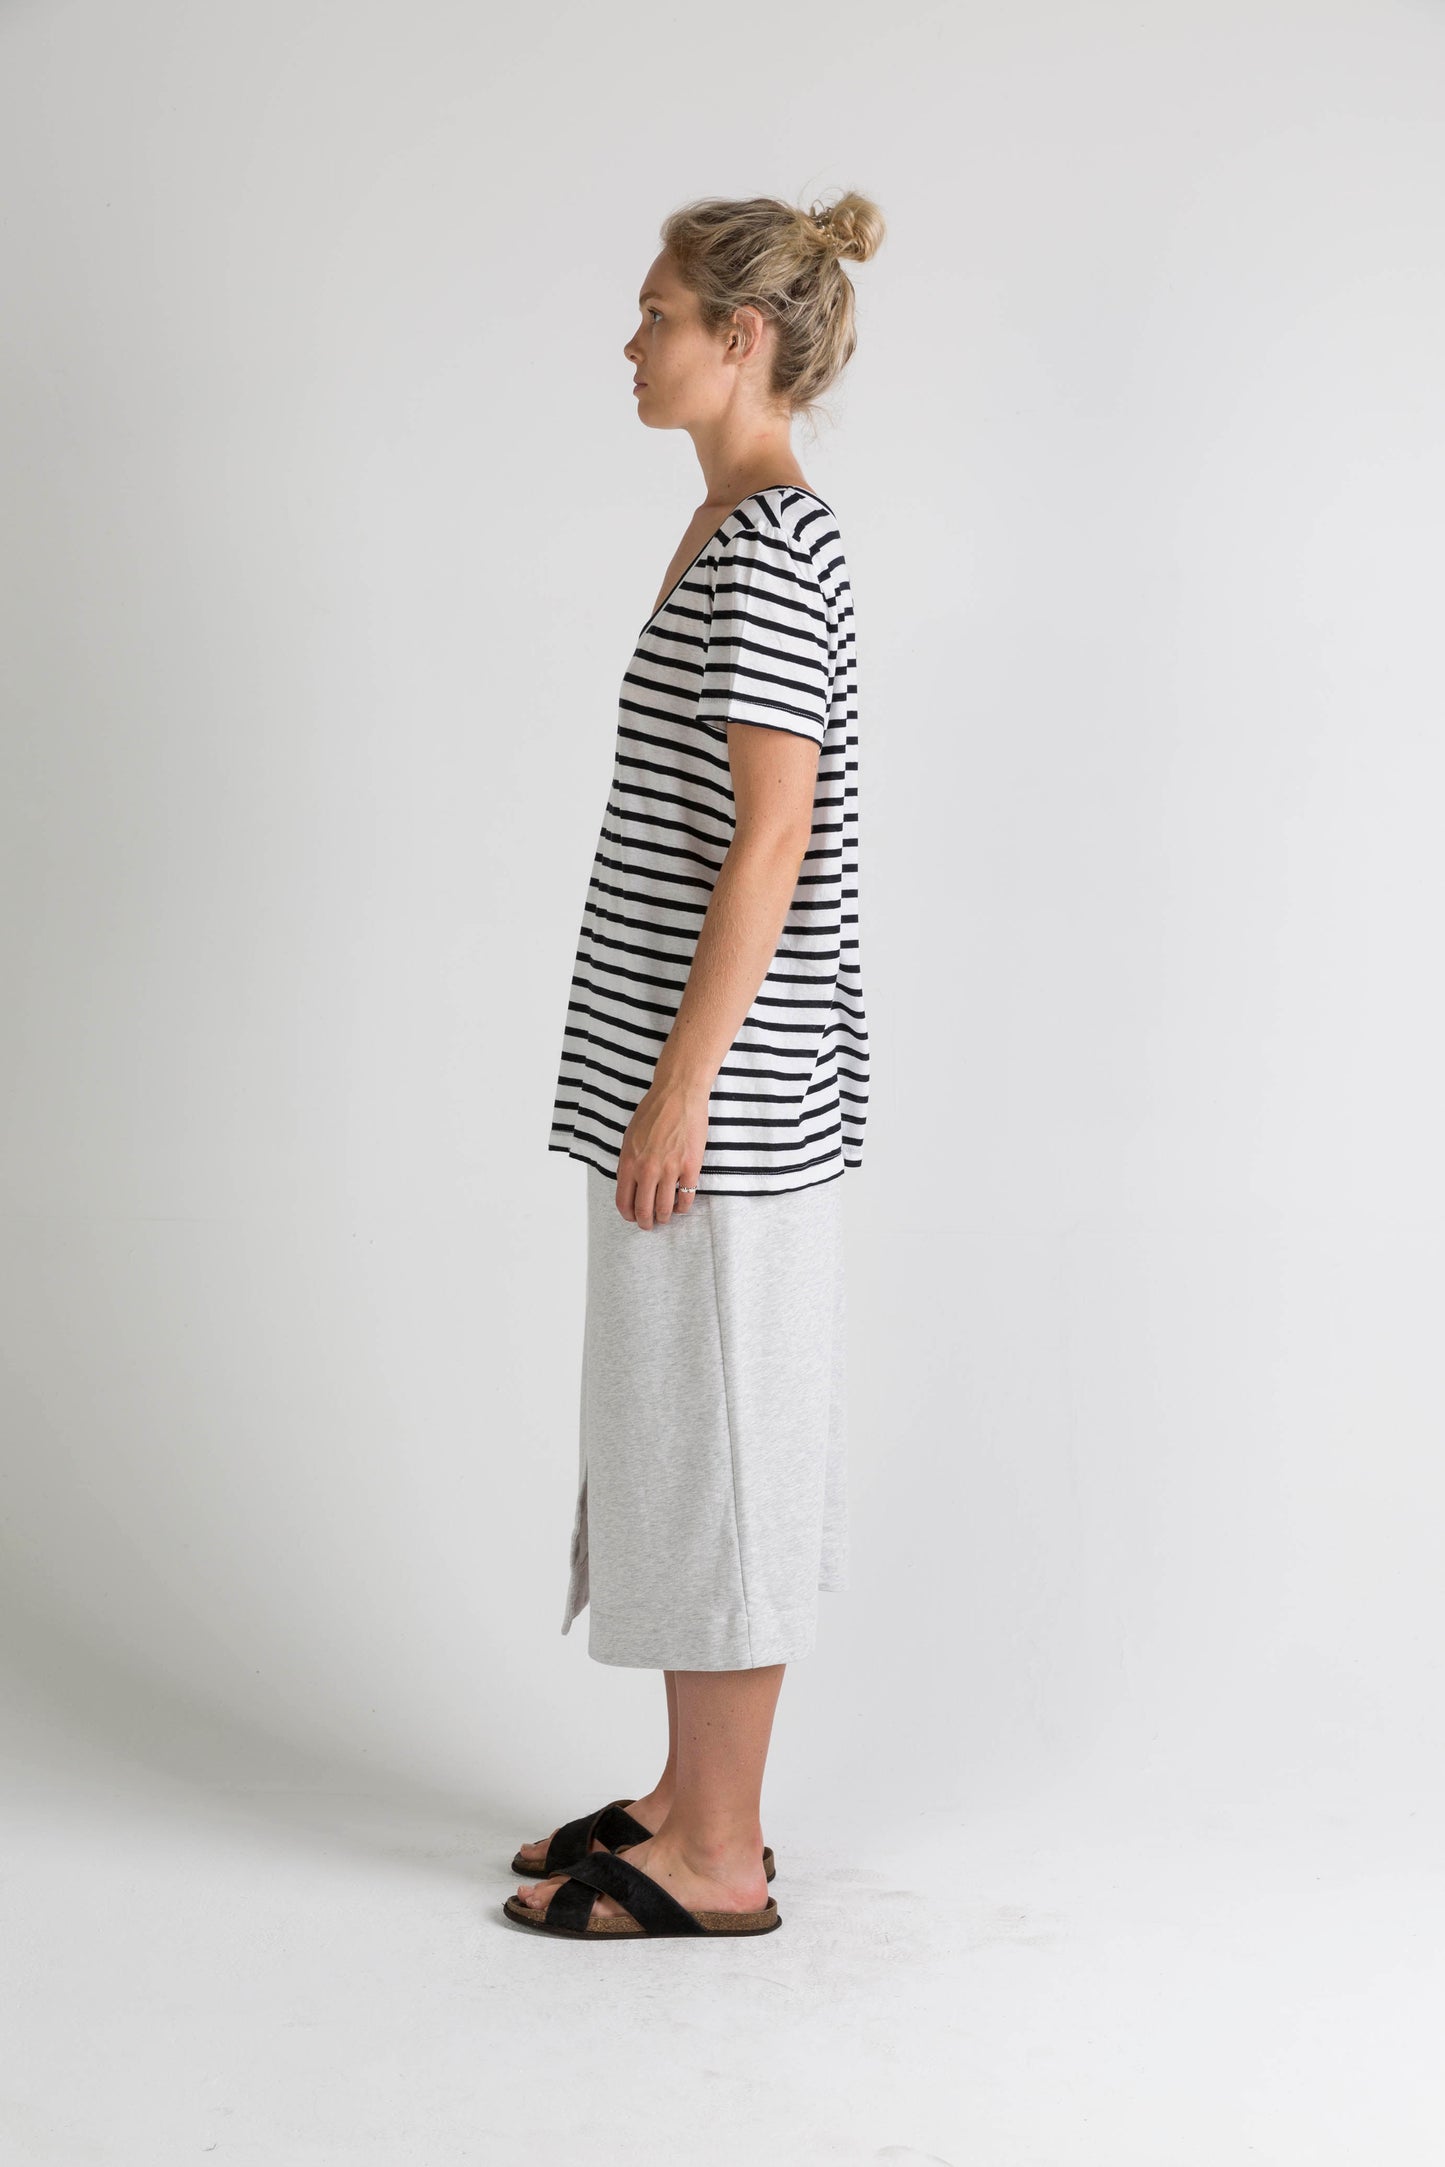 Ophelia and Ryder Striped T-Shirt